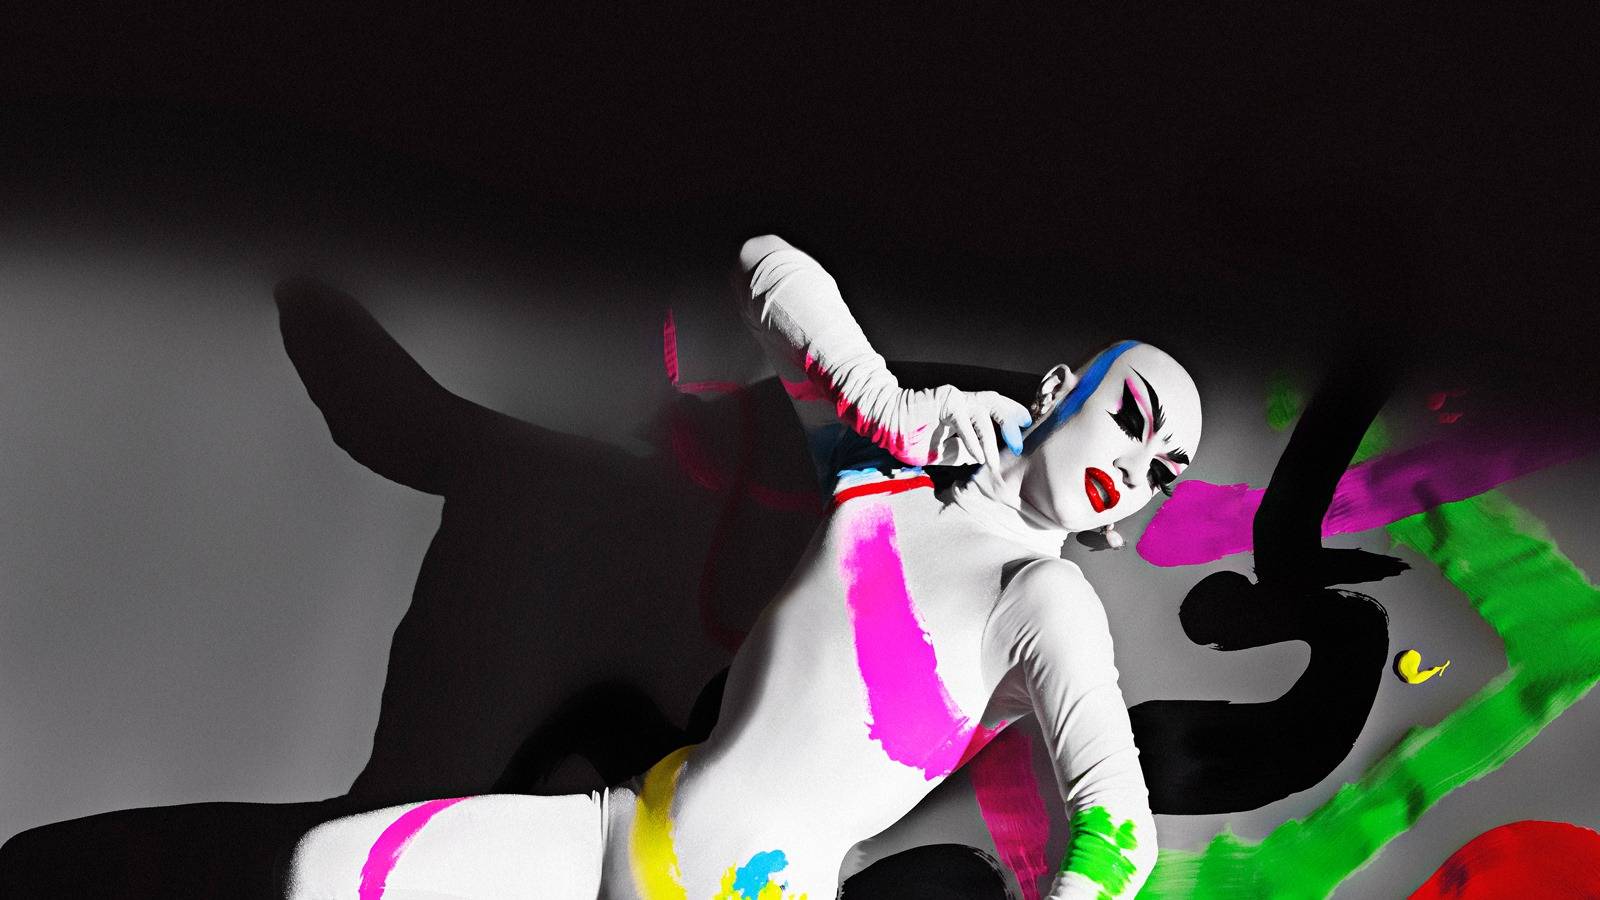 Sasha Velour lays on stage, propped on one arm. She is in an all white bodysuit, and her face is also painted white. Large streaks of neon paint are across the floor and her bodysuit. 